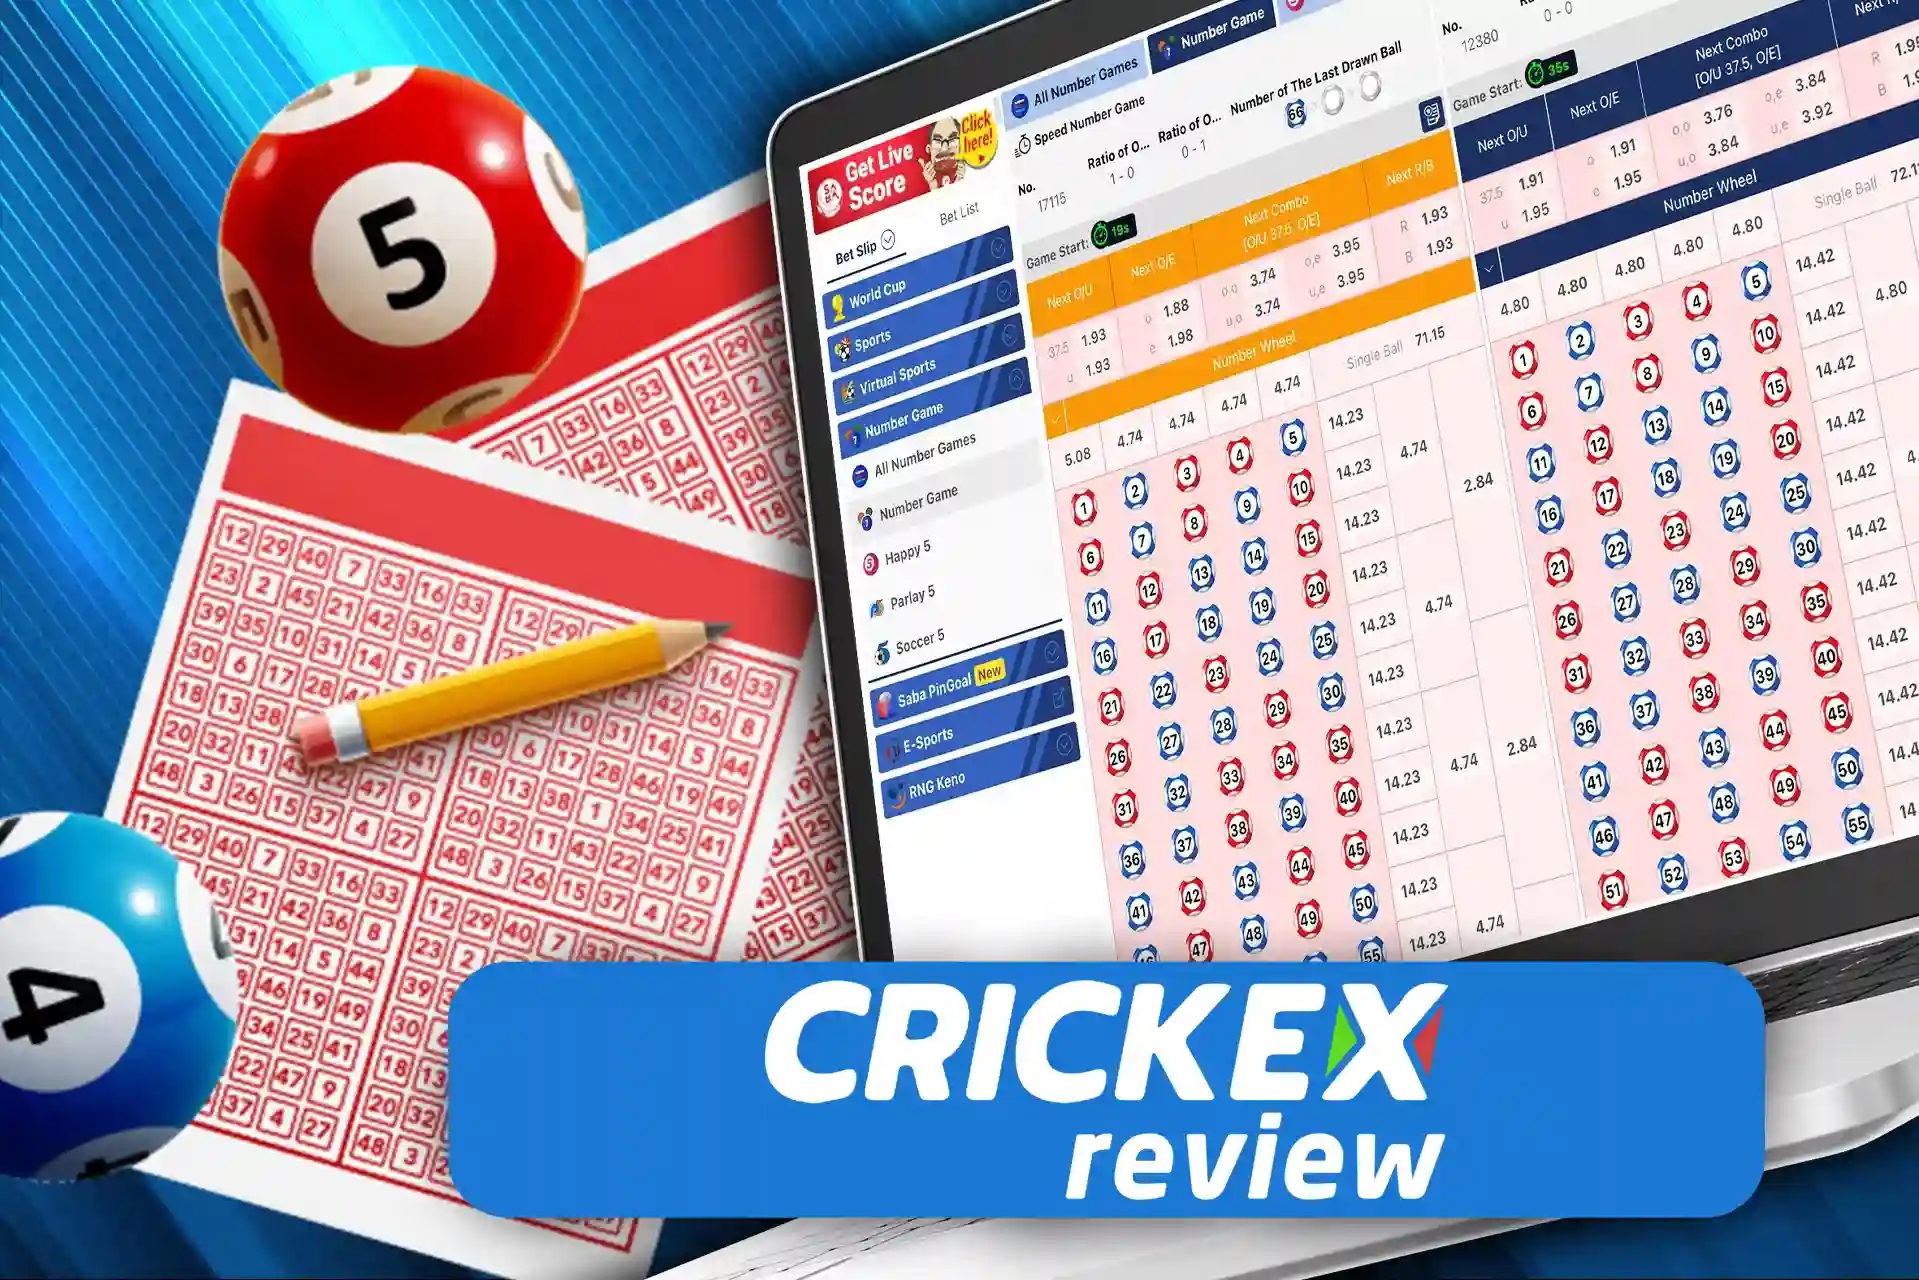 Test your luck and play lottery games at Crickex.